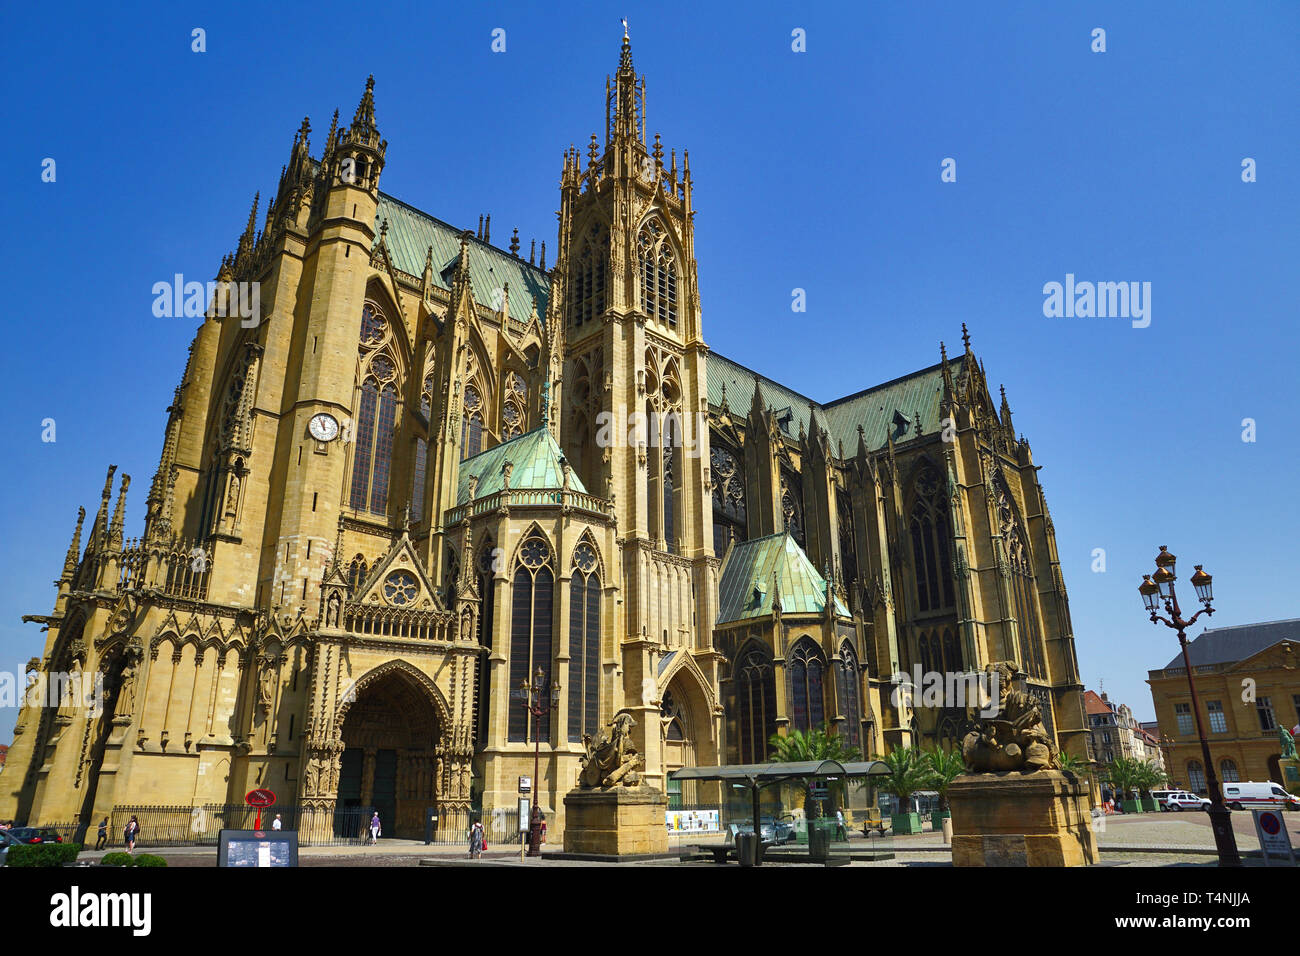 Cathedral of Metz / France Stock Photo